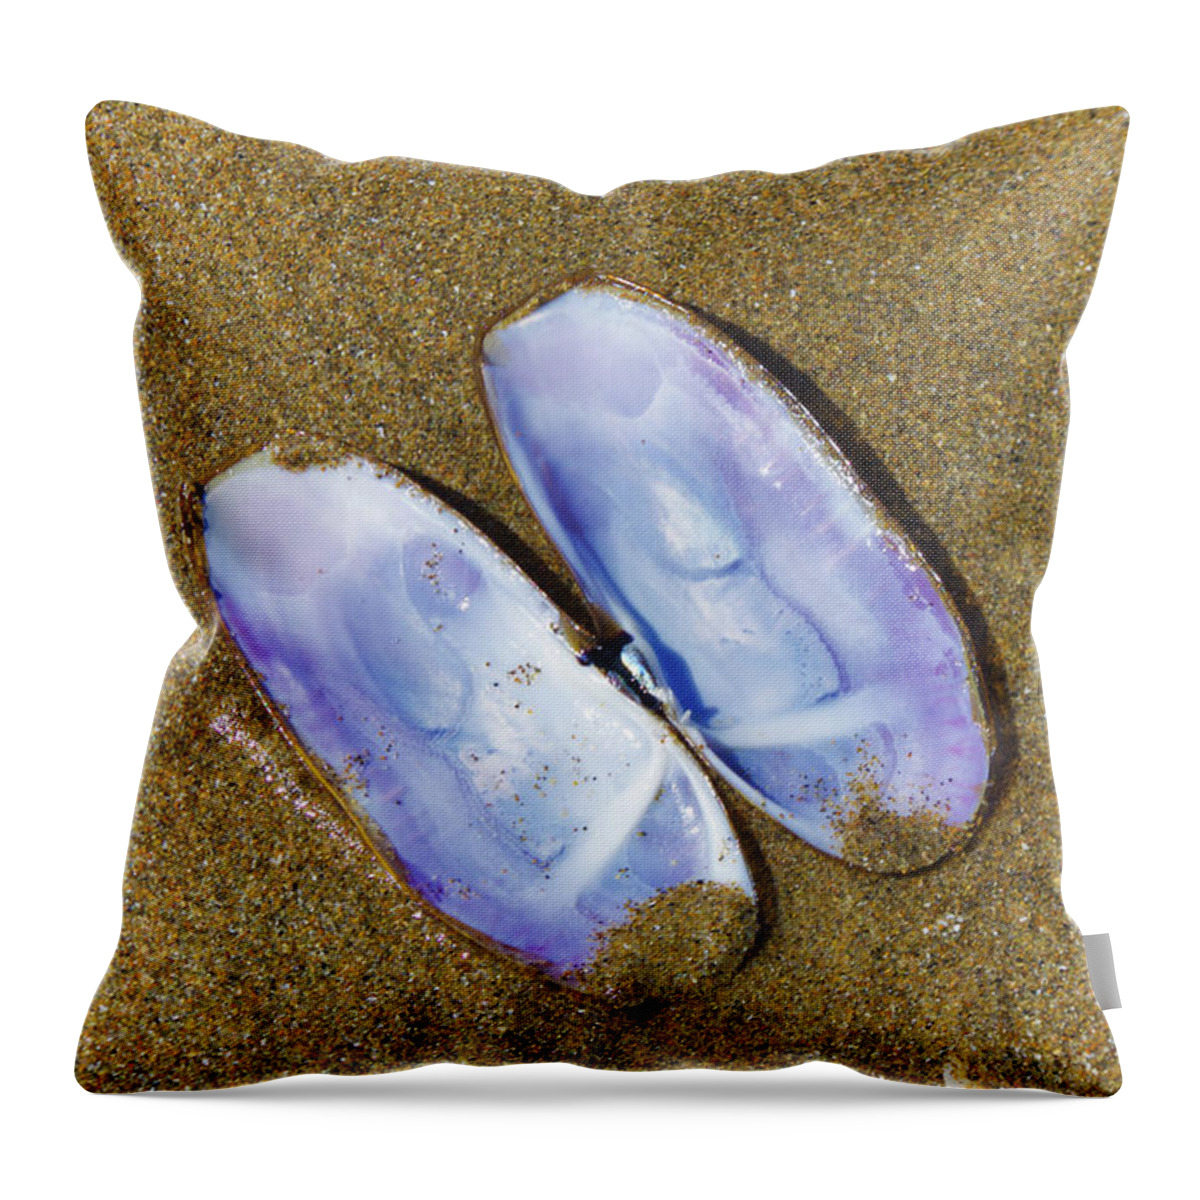 Adria Trail Throw Pillow featuring the photograph Open Clam Shell by Adria Trail